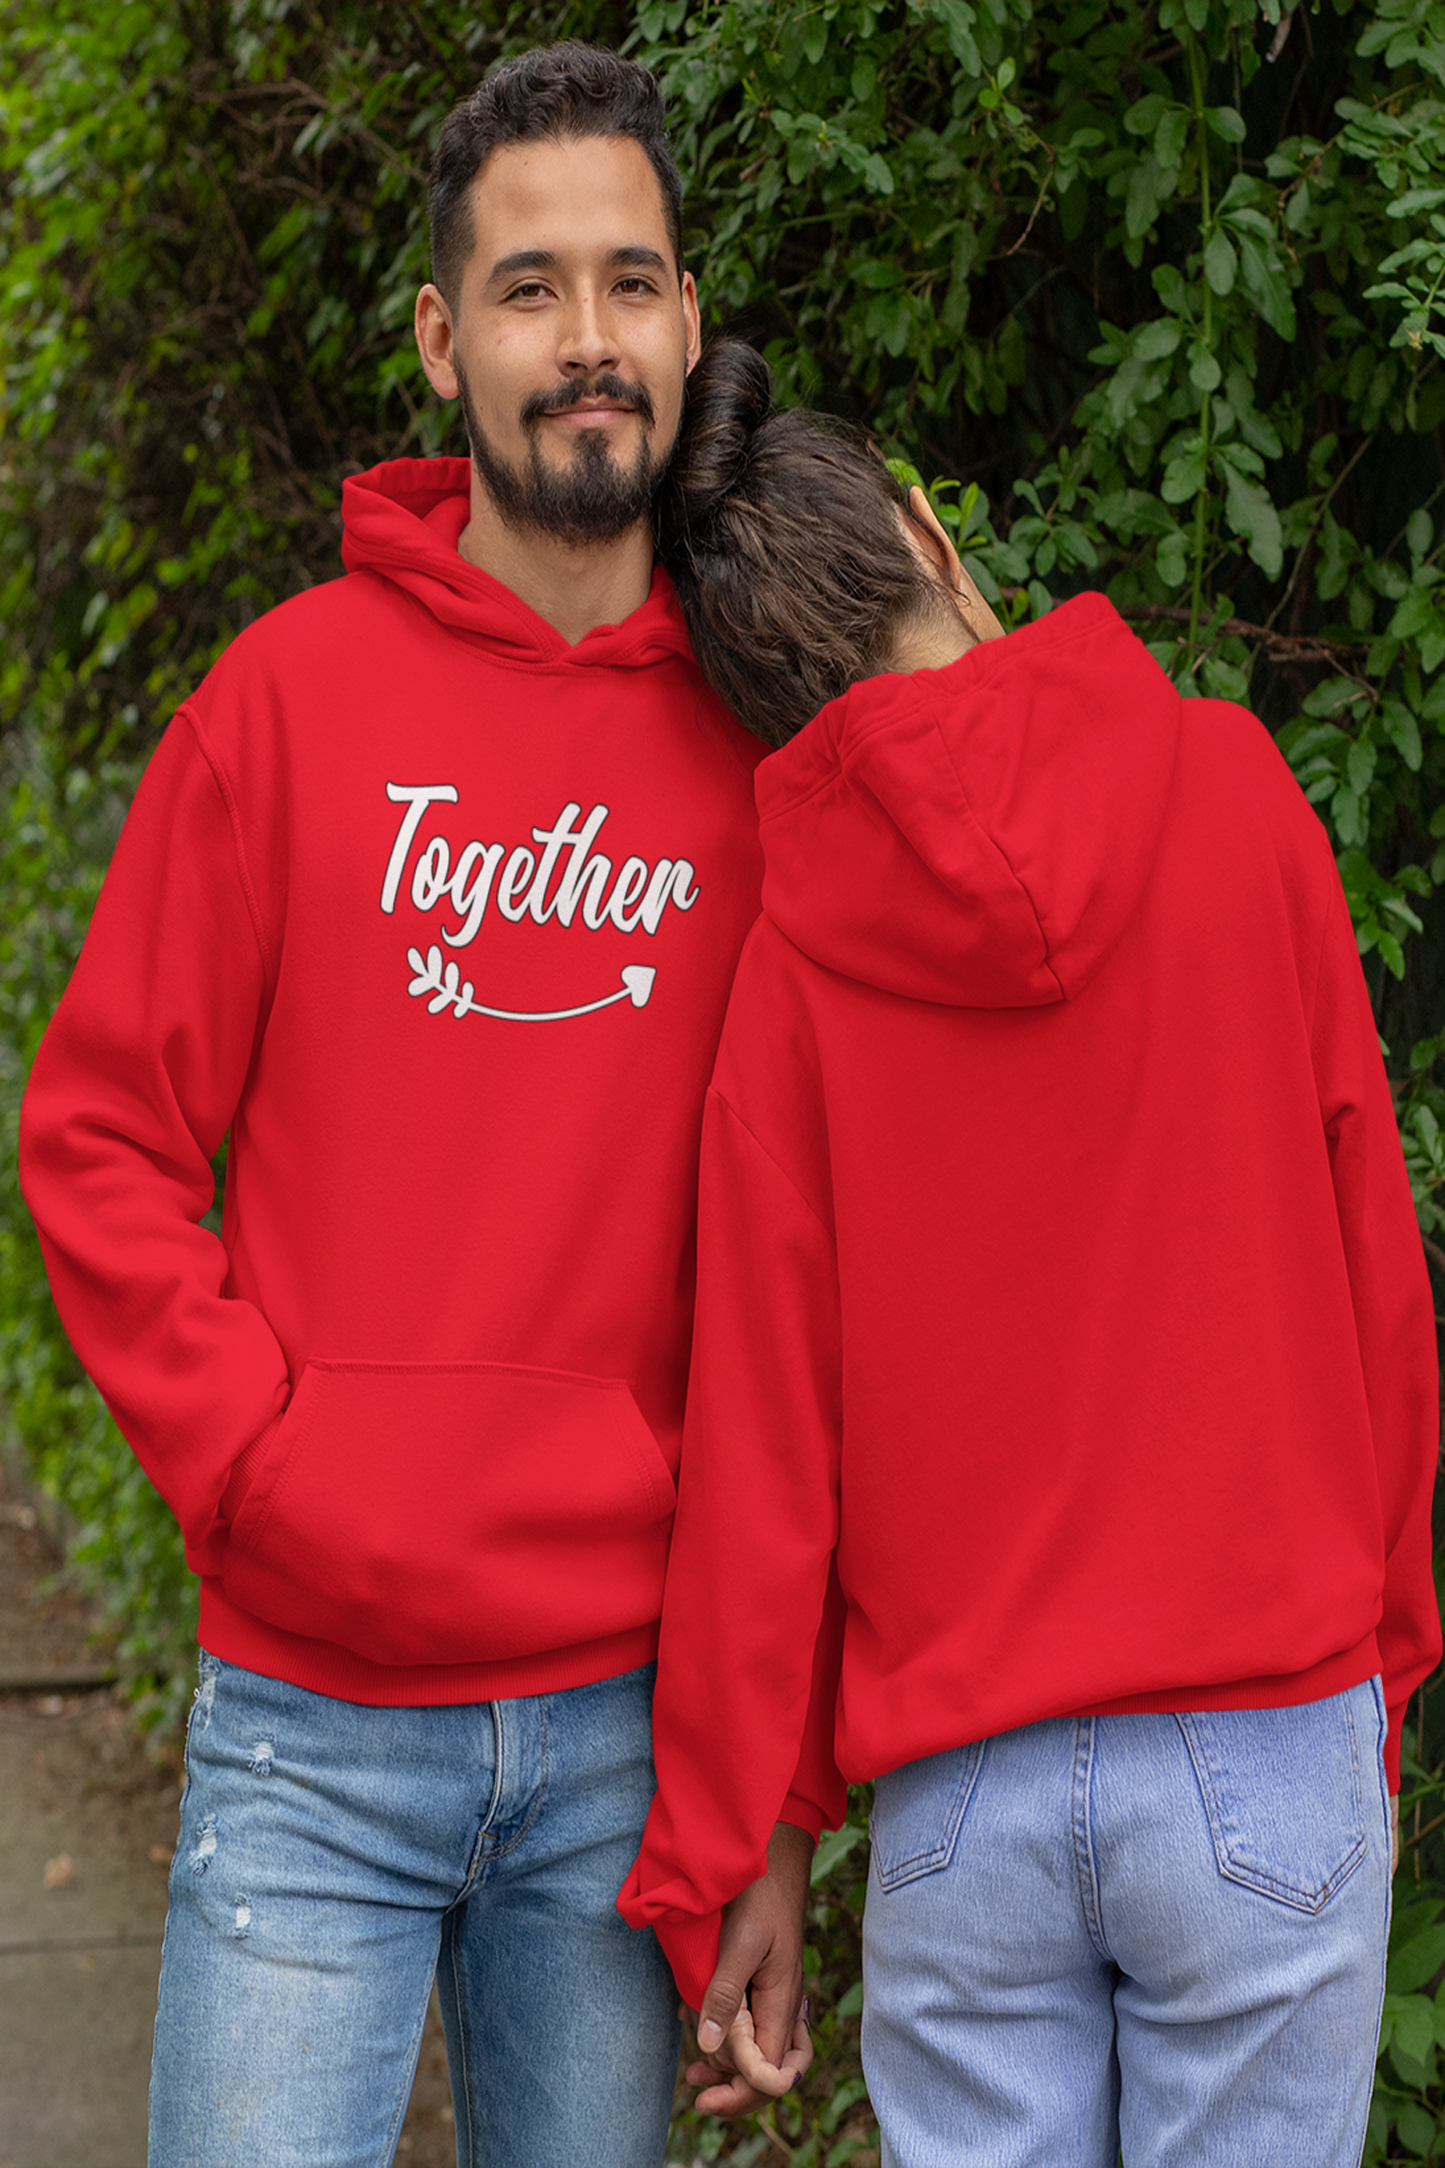 Together Forever Matching Couple Hoodies